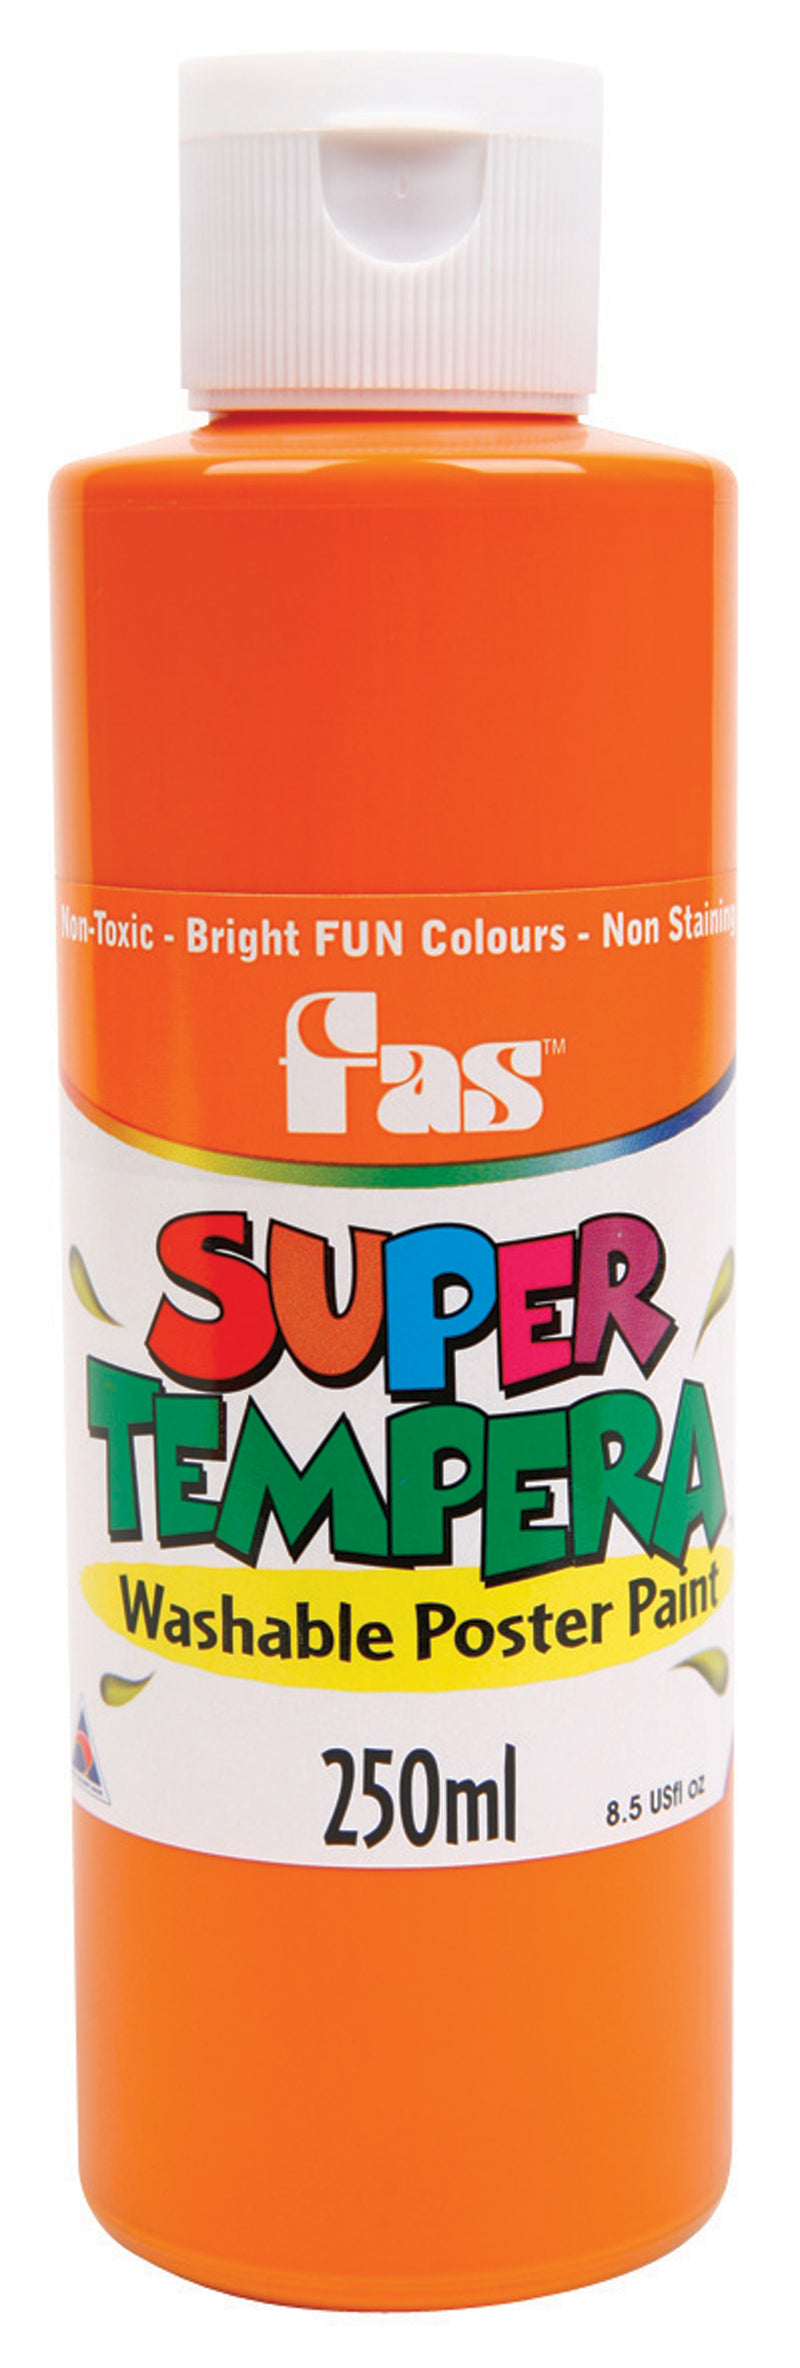 Fas Super Tempera Washable Poster Paint 250ml